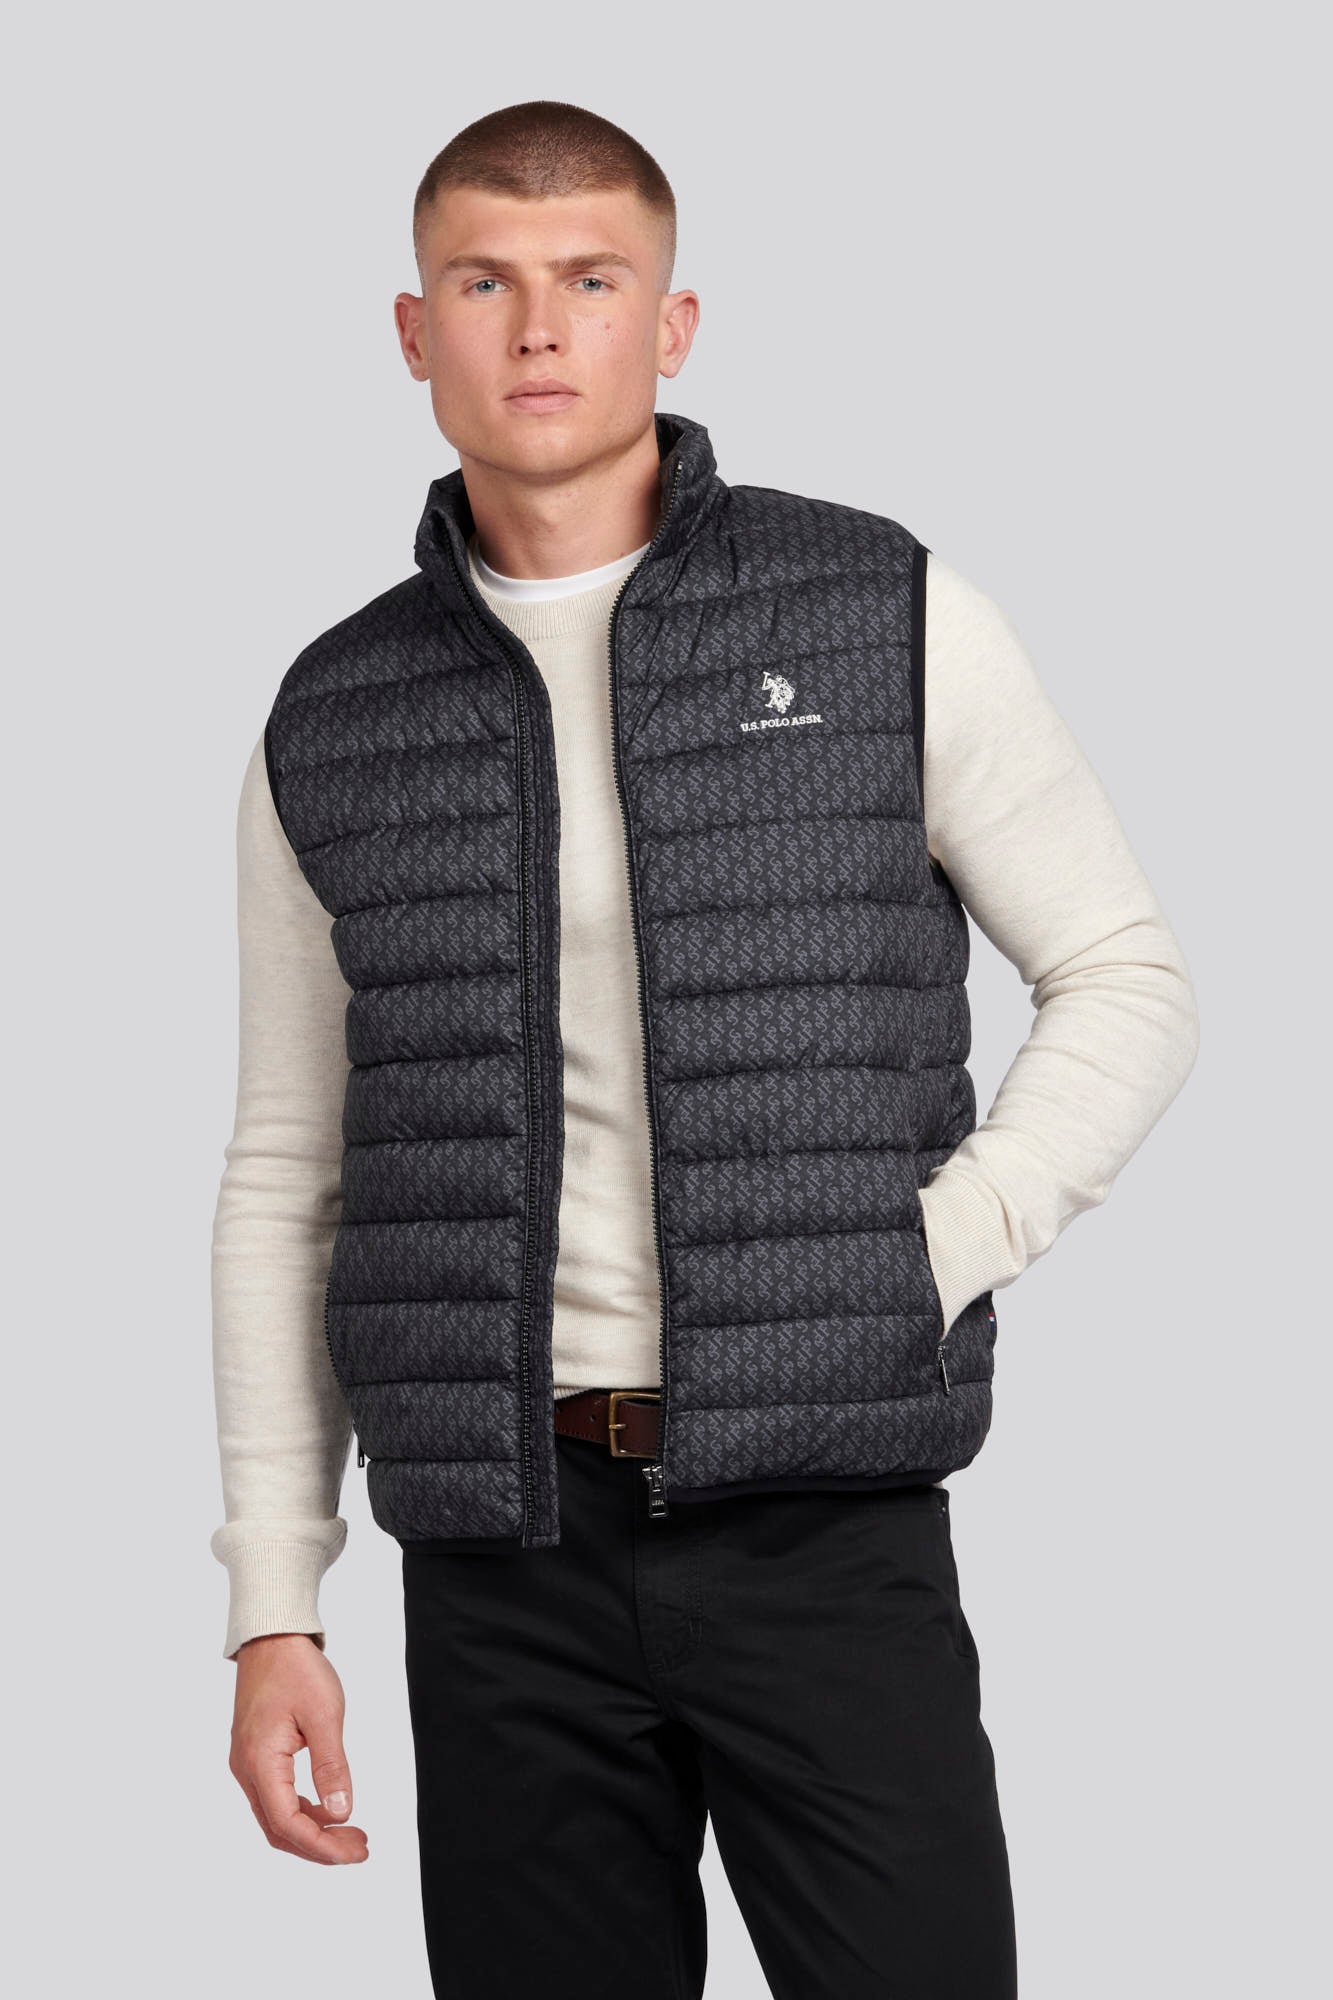 U.S. Polo Assn. Mens Monogram Quilted Gilet in Black Bright White DHM